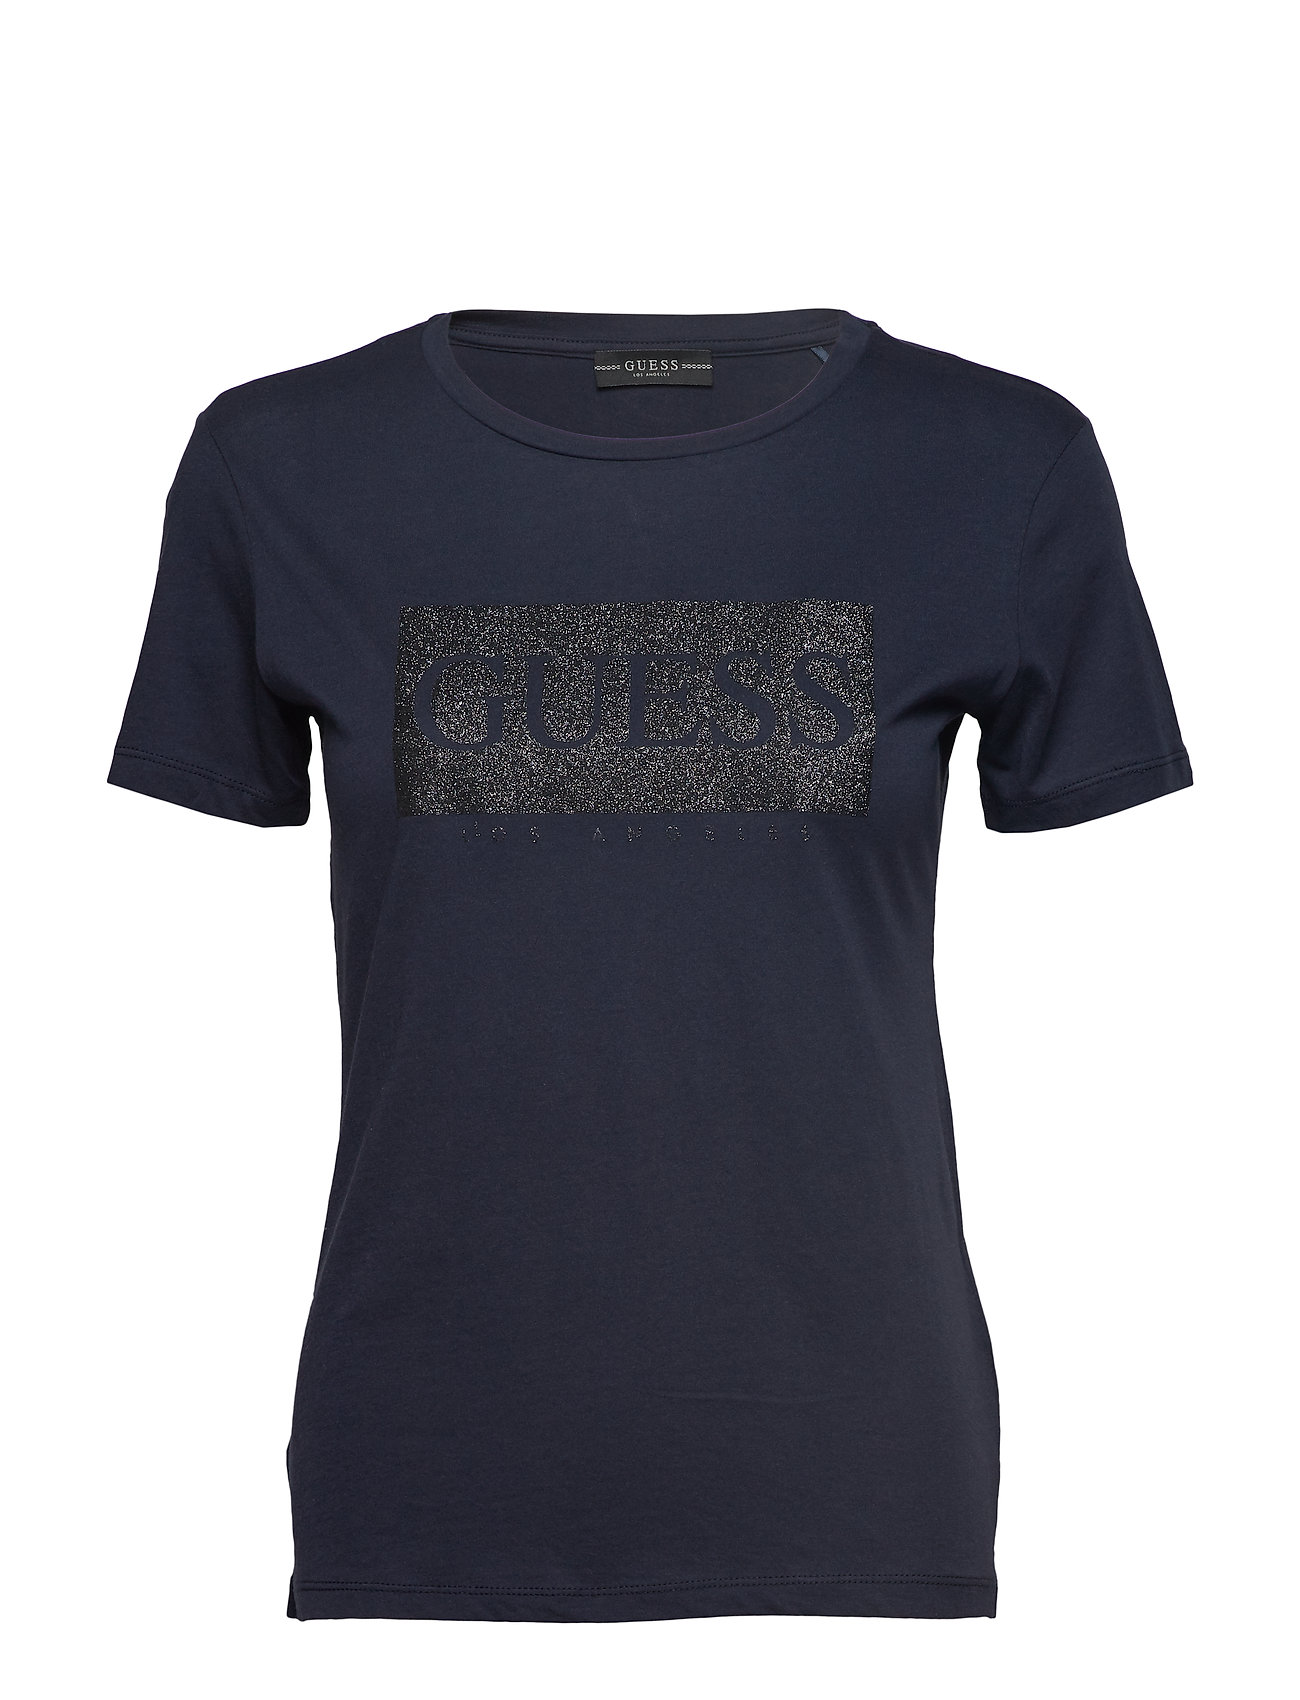 Best Of Guess Jeans T Shirt | Trend Style